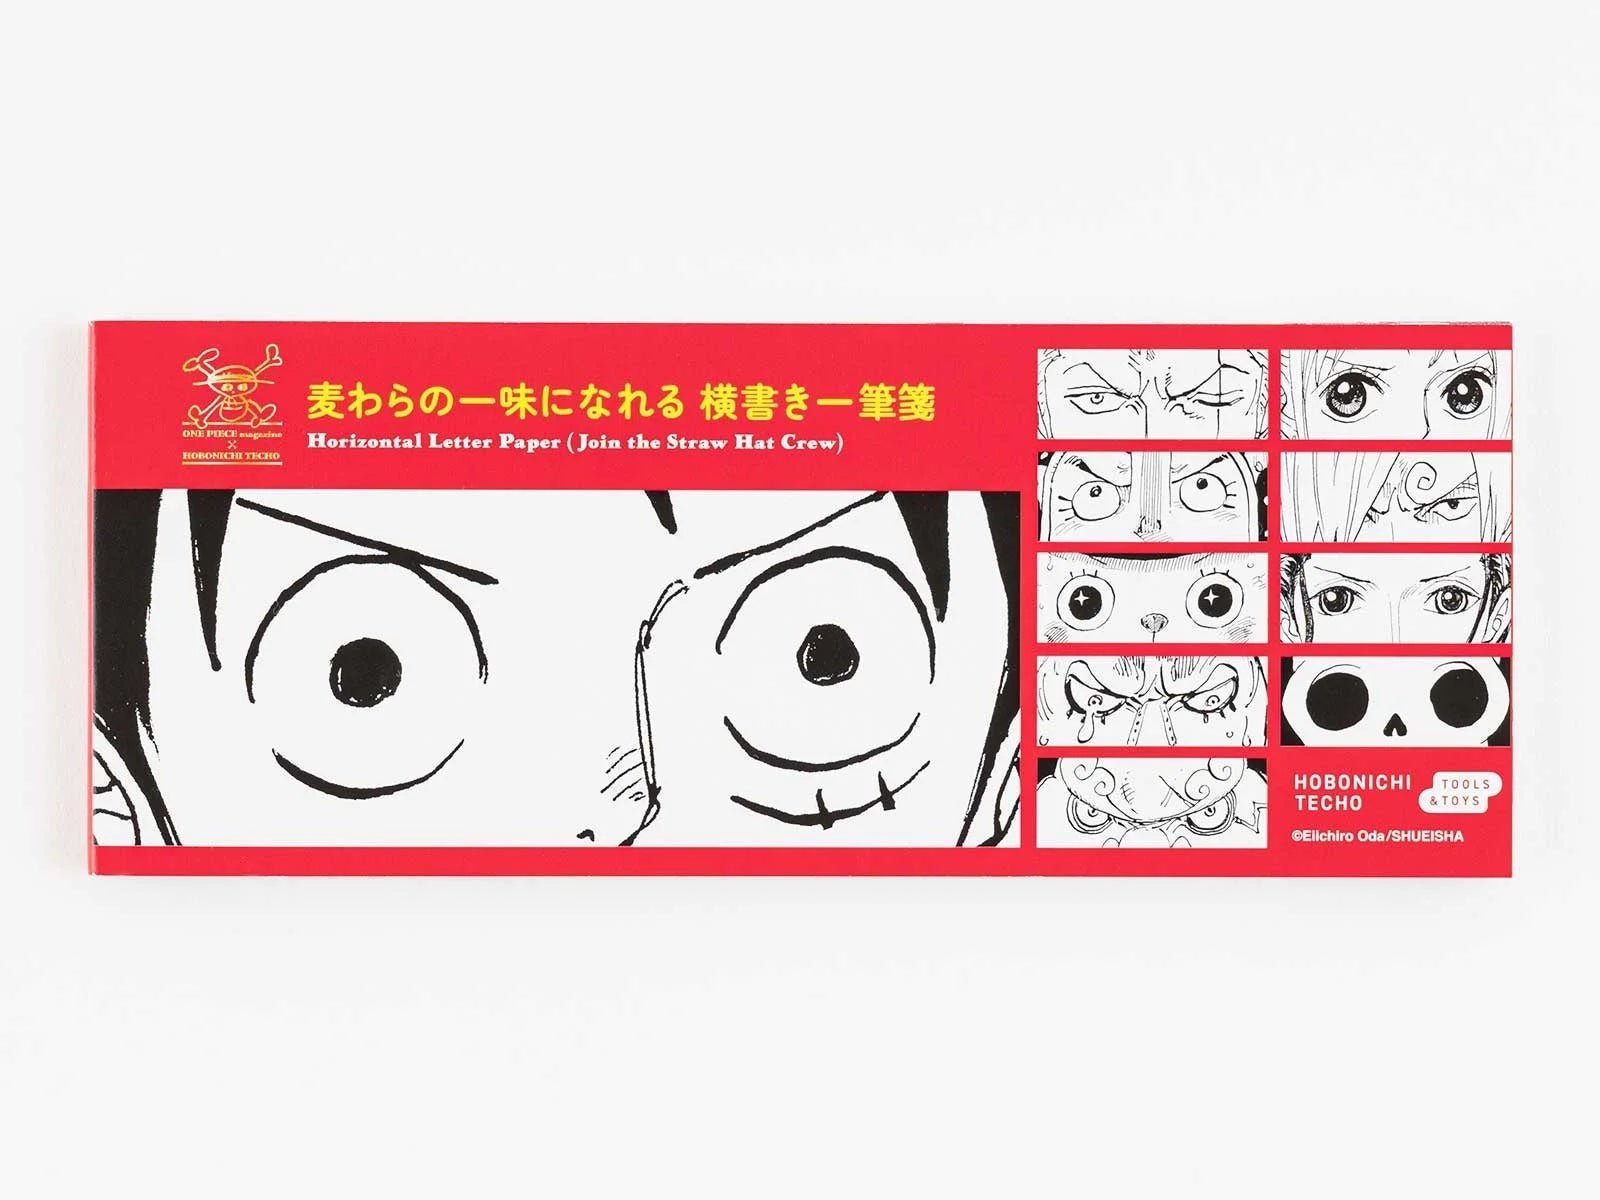 Hobonichi ONE PIECE magazine: Horizontal Letter Paper Join the Straw Hat Crew